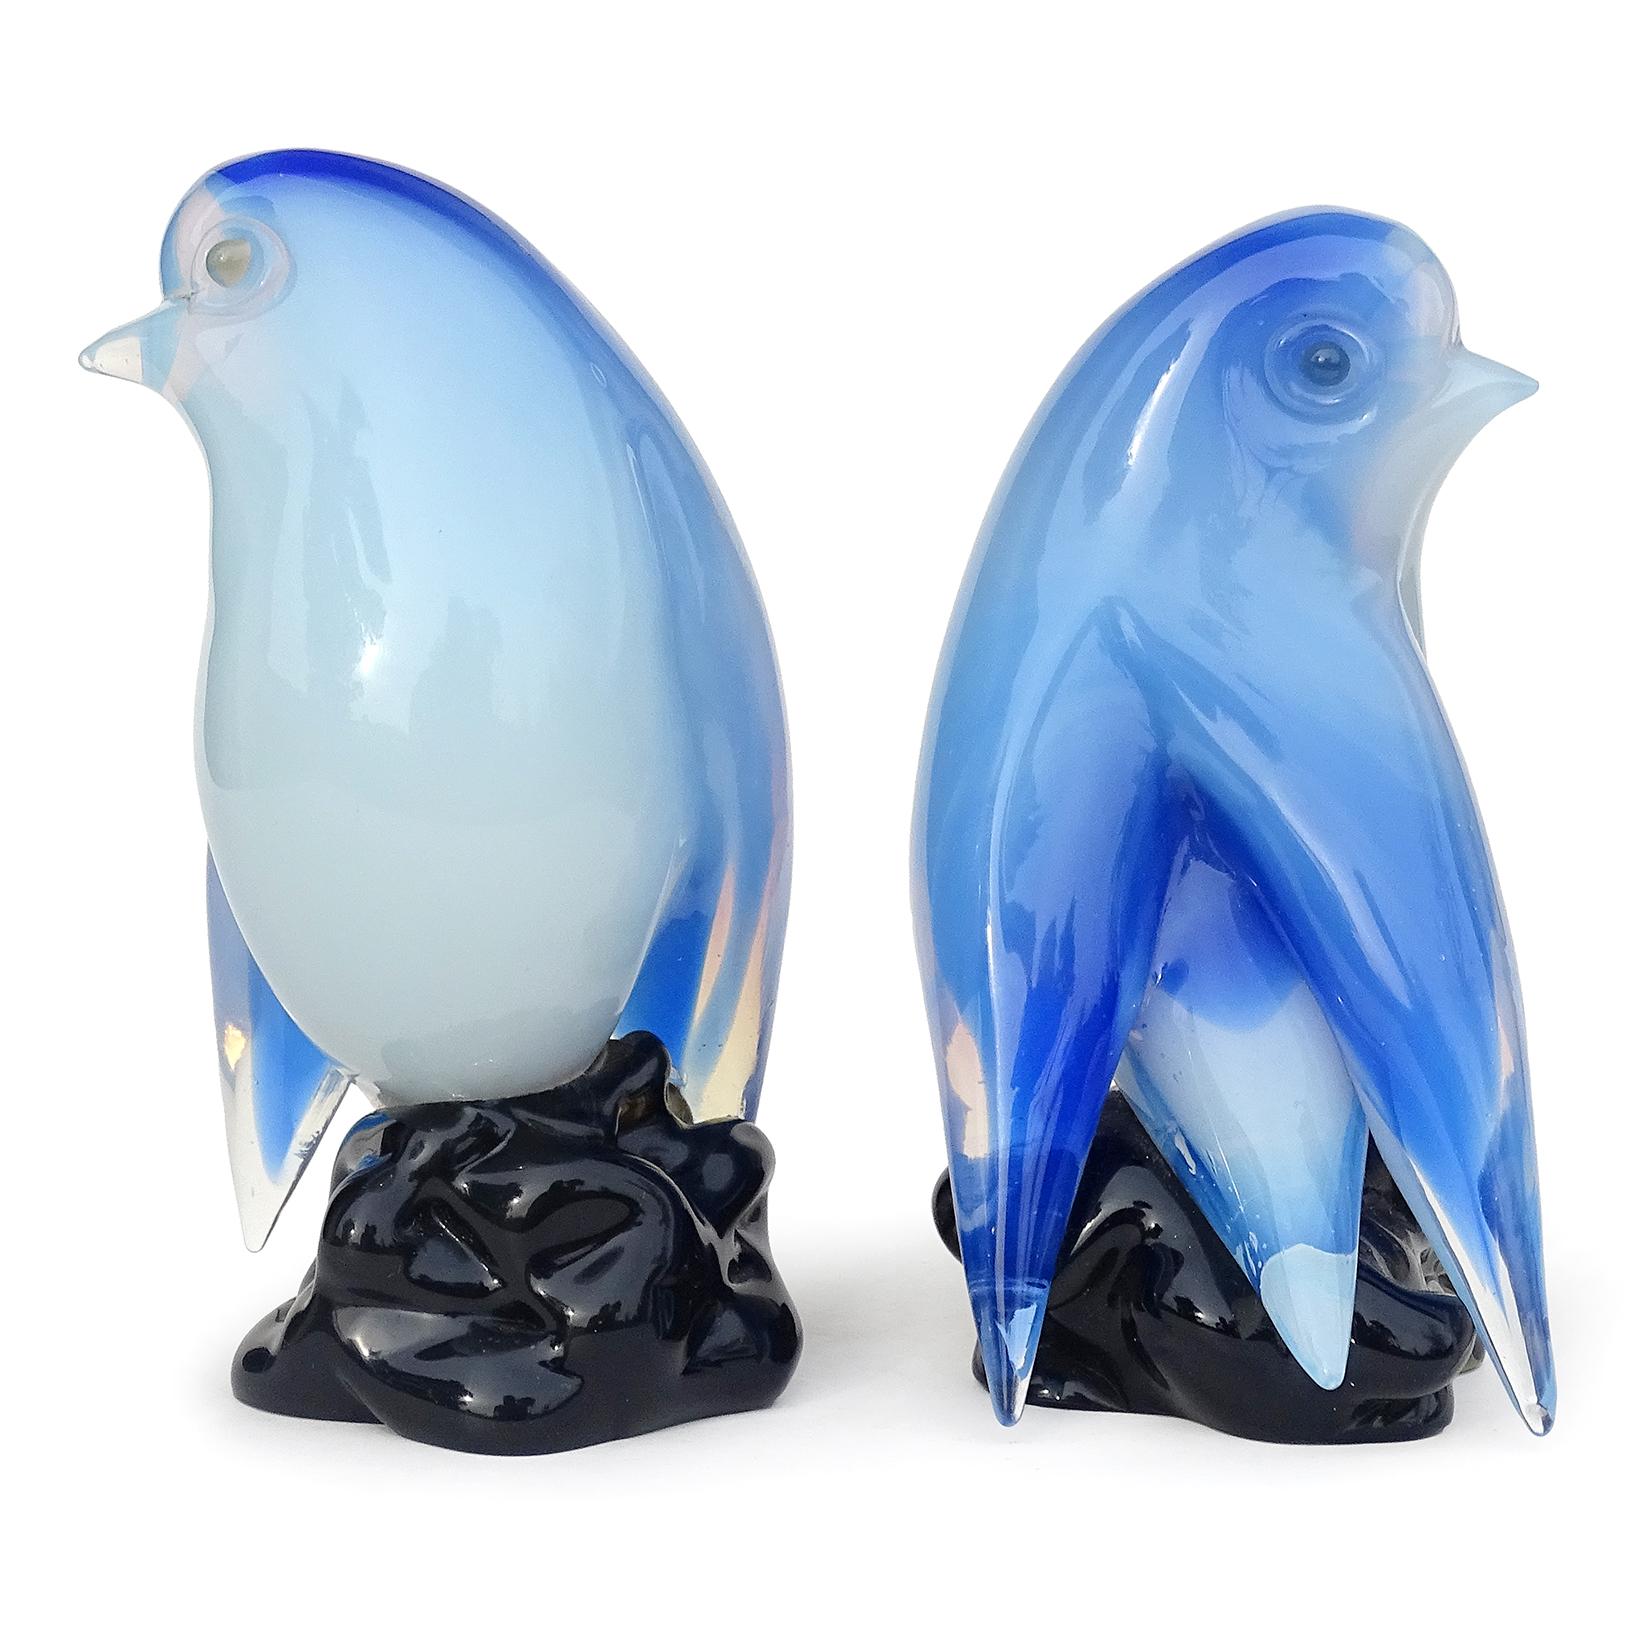 Priced per item (2 birds available). Beautiful vintage Murano hand blown, opalescent white and sky blue Italian art glass bird figurine / sculpture. Attributed to the Seguso Vetri d'Arte company, circa 1950s. The cute birds have gray eyes, and stand